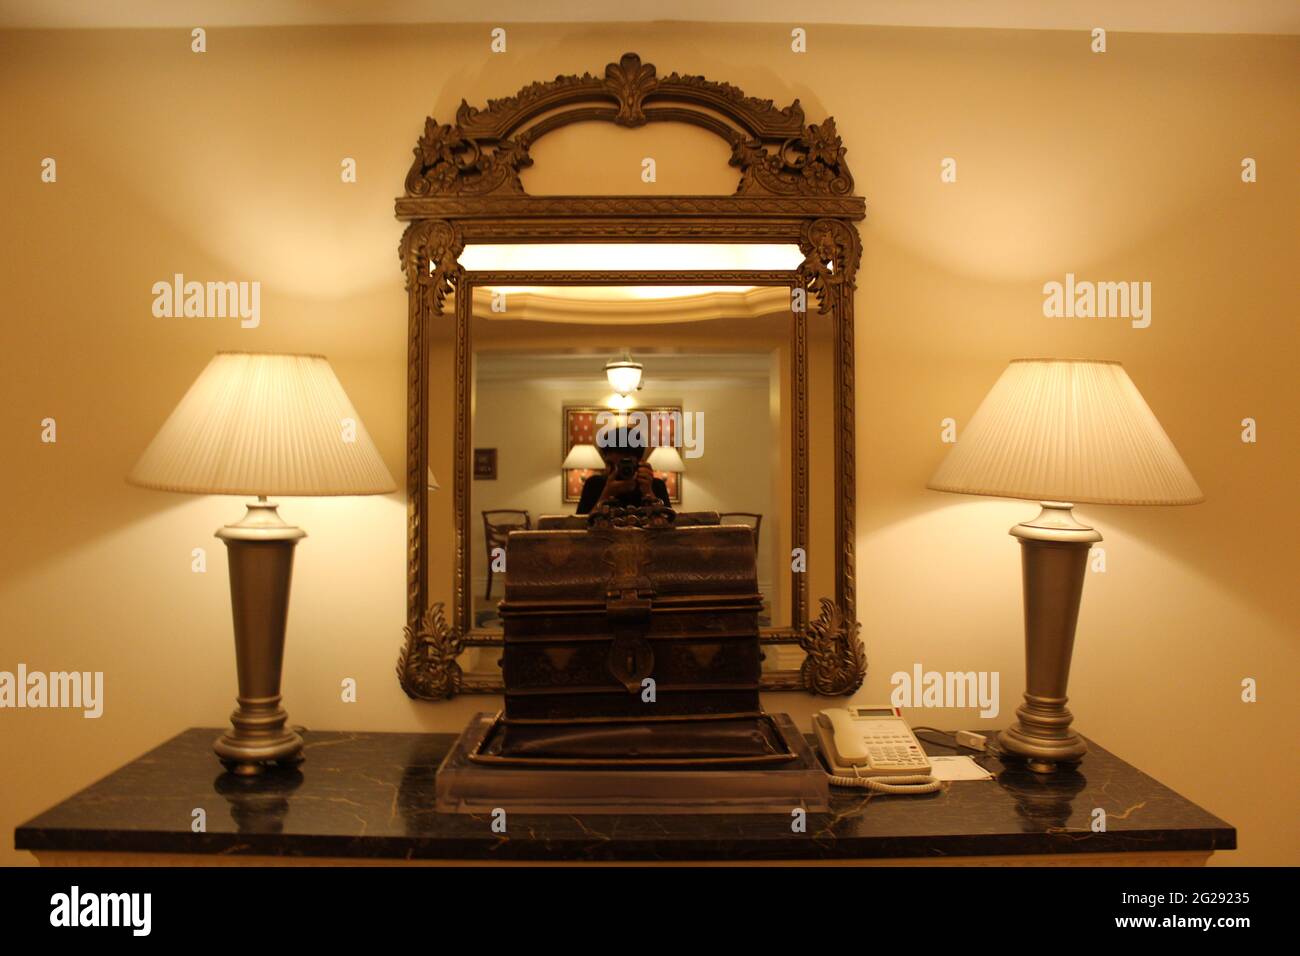 Mirror and Lamps with Luxury Design and Ancient Chest Stock Photo